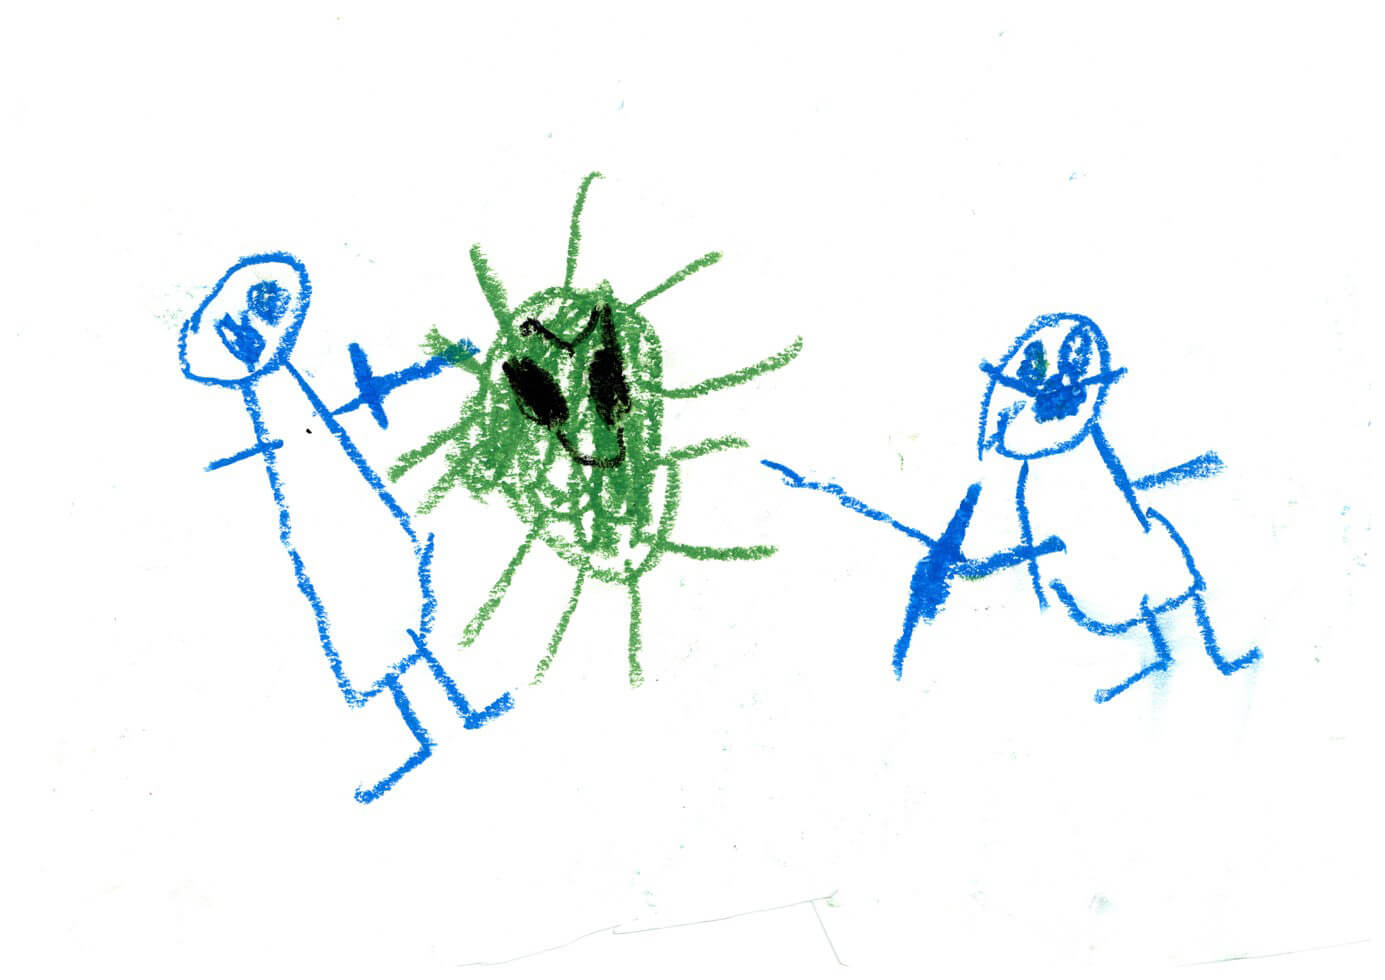 Child's drawing during COVID pandemic